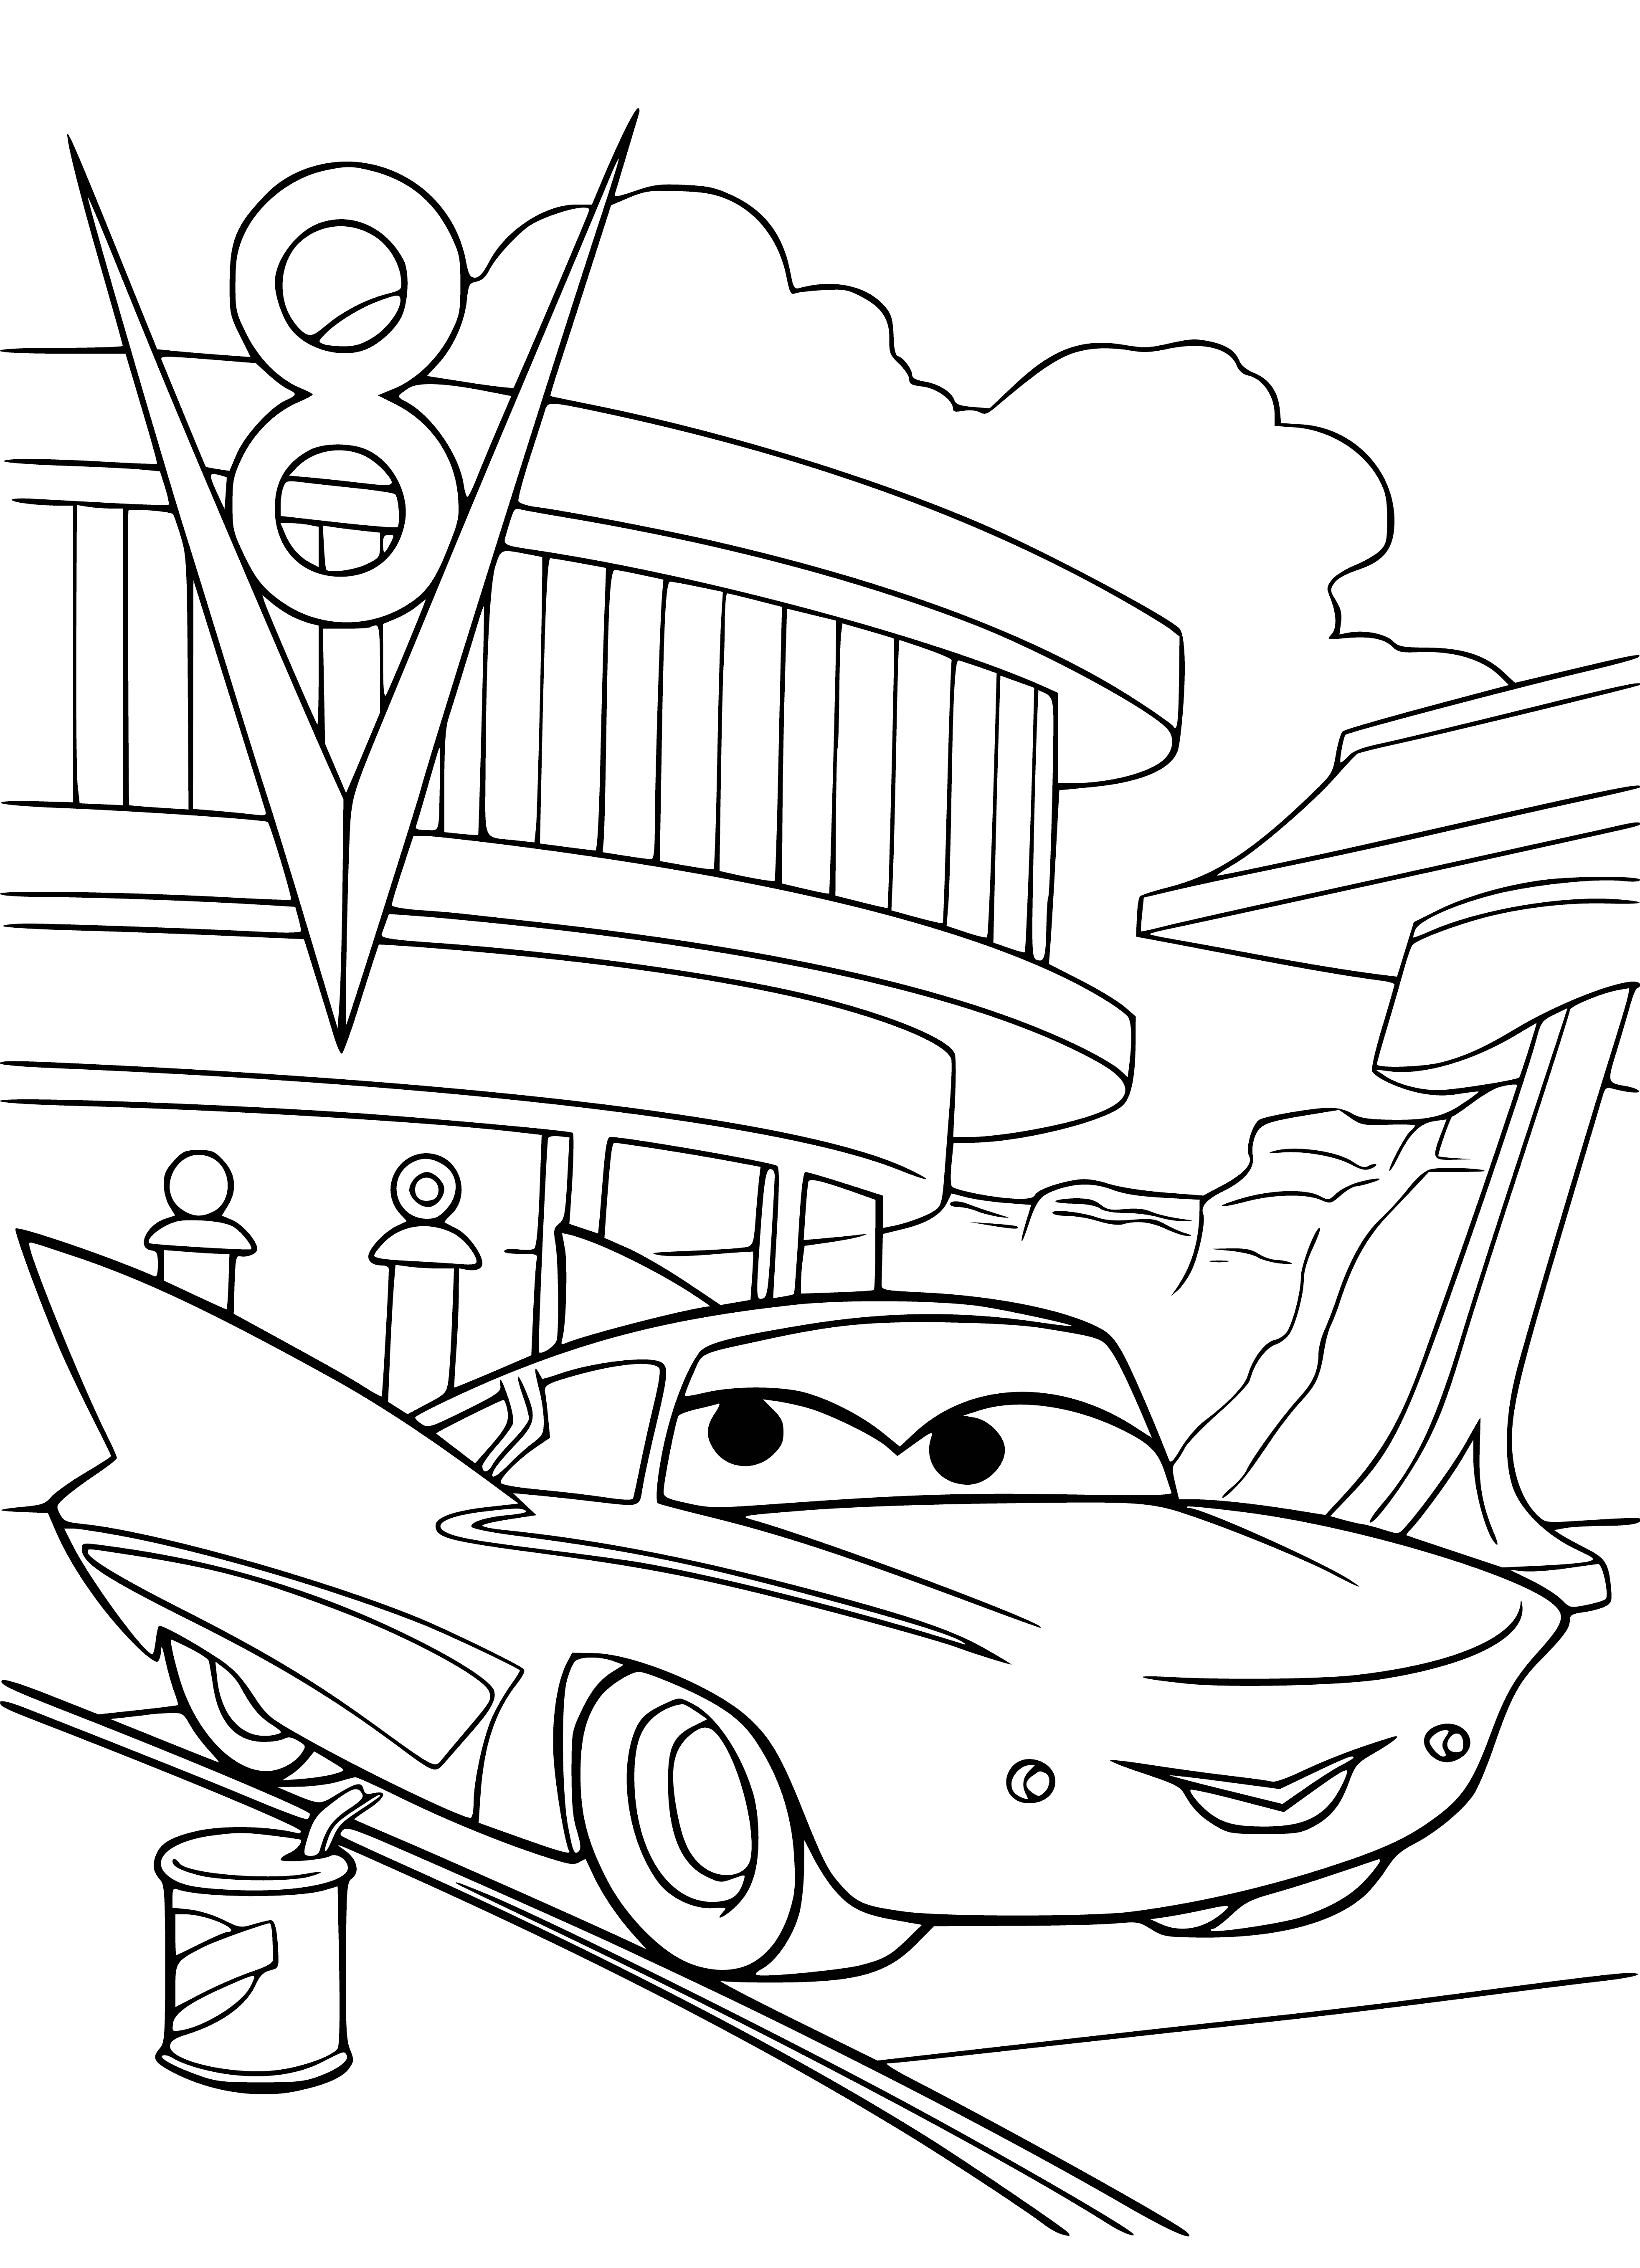 Refueling coloring page